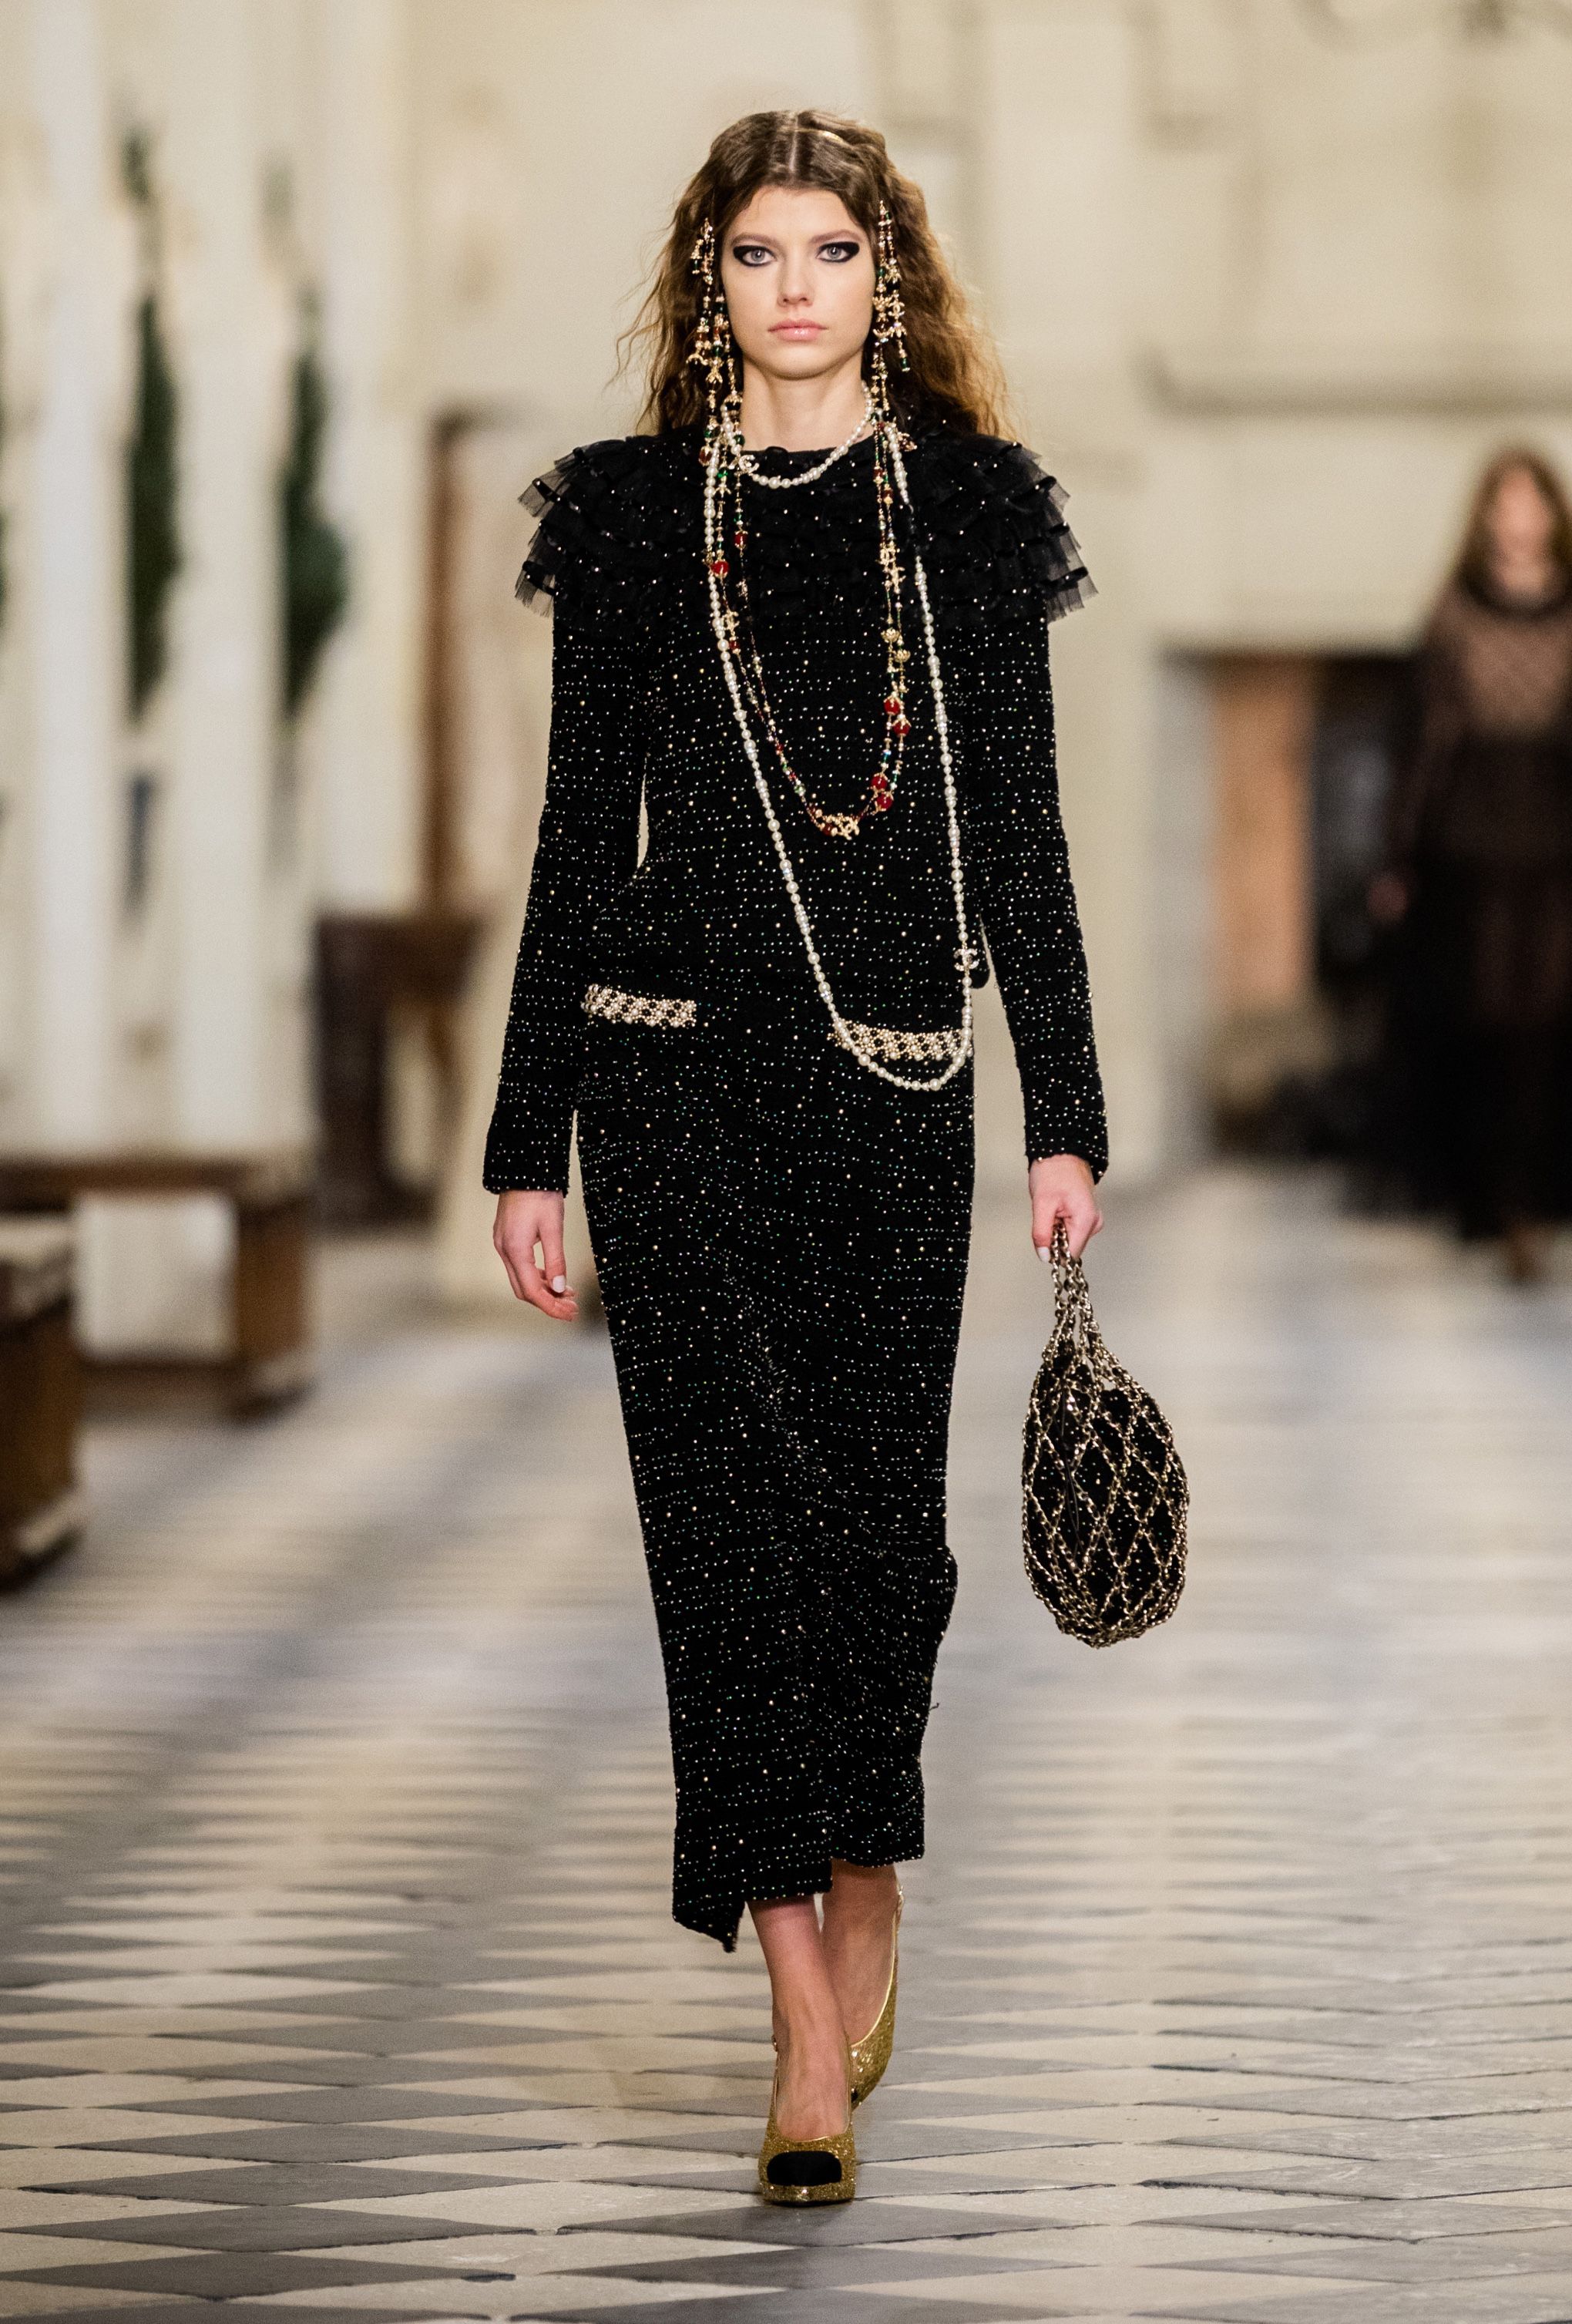 Glass reviews the Chanel Métiers d'art Collection 2020/21 - The Glass  Magazine